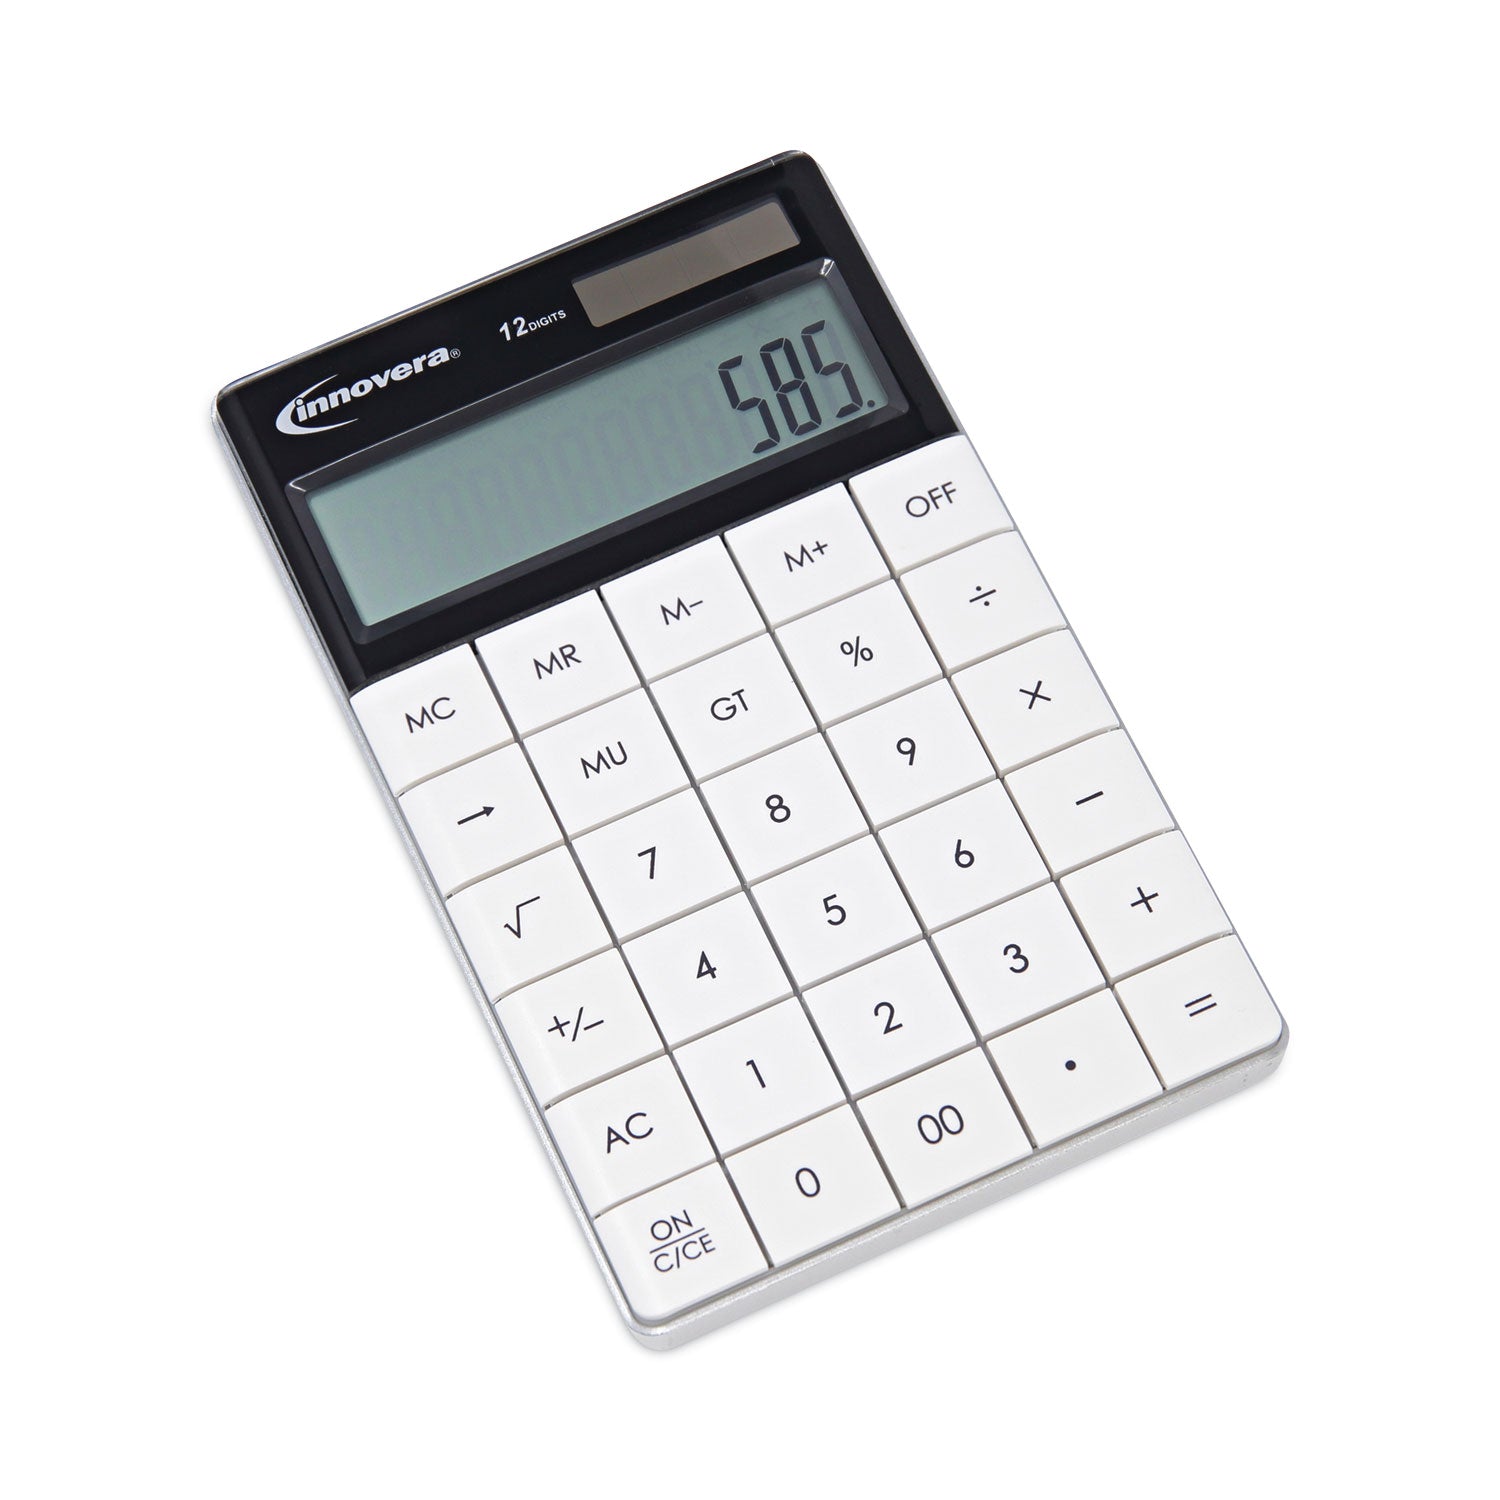 15973-large-button-calculator-12-digit-lcd_ivr15973 - 1